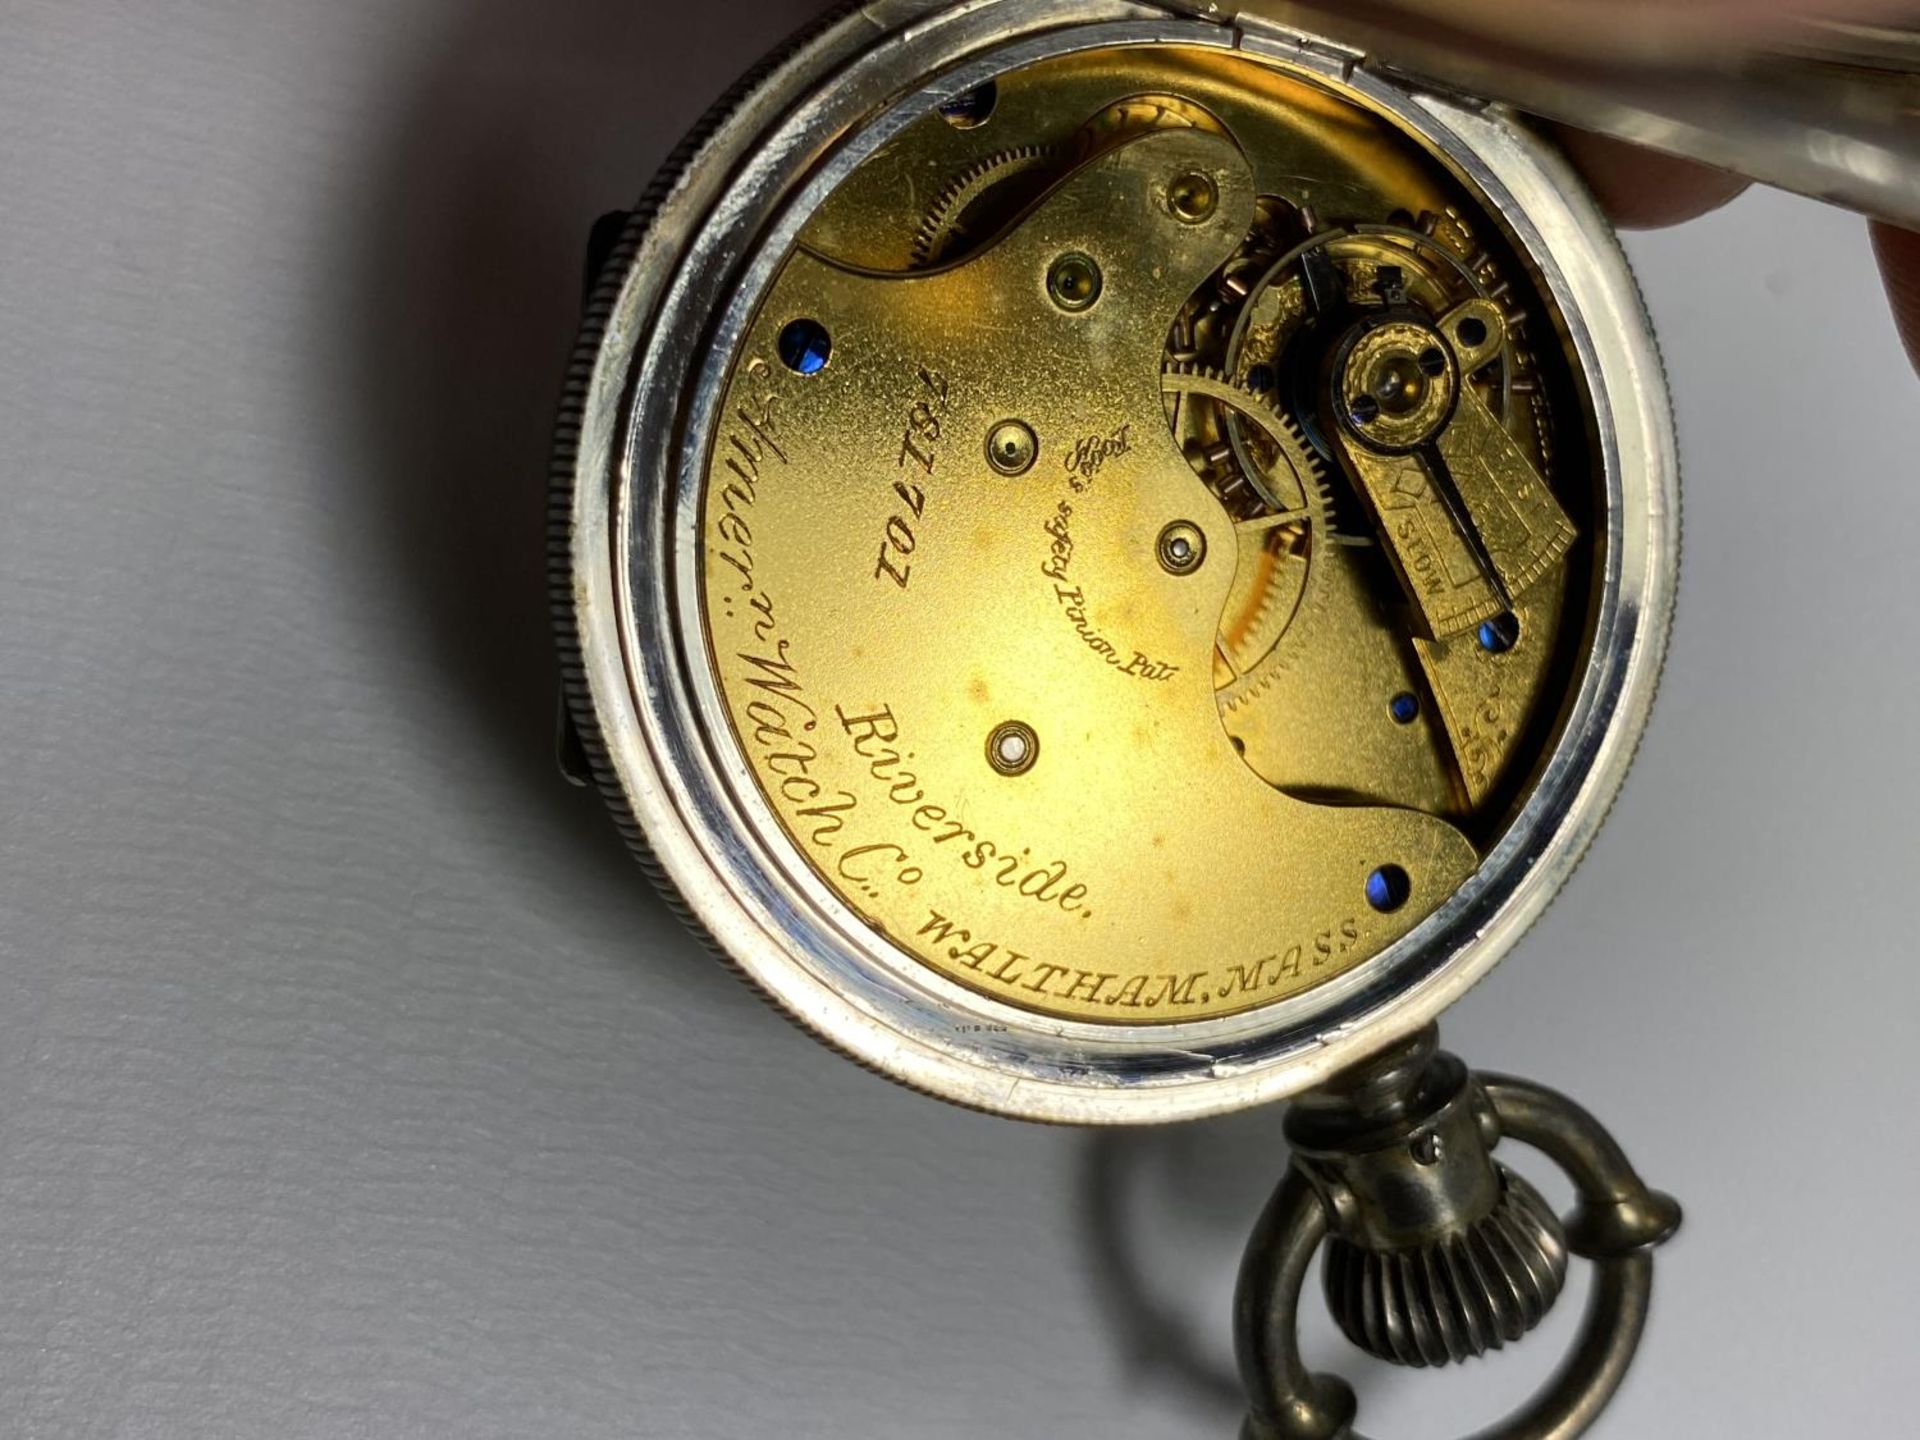 AN AMERICAN WATCH CO. WALTHAM MASS OPEN FACED CROWN WIND POCKET WATCH IN LEATHER POUCH - Image 2 of 3